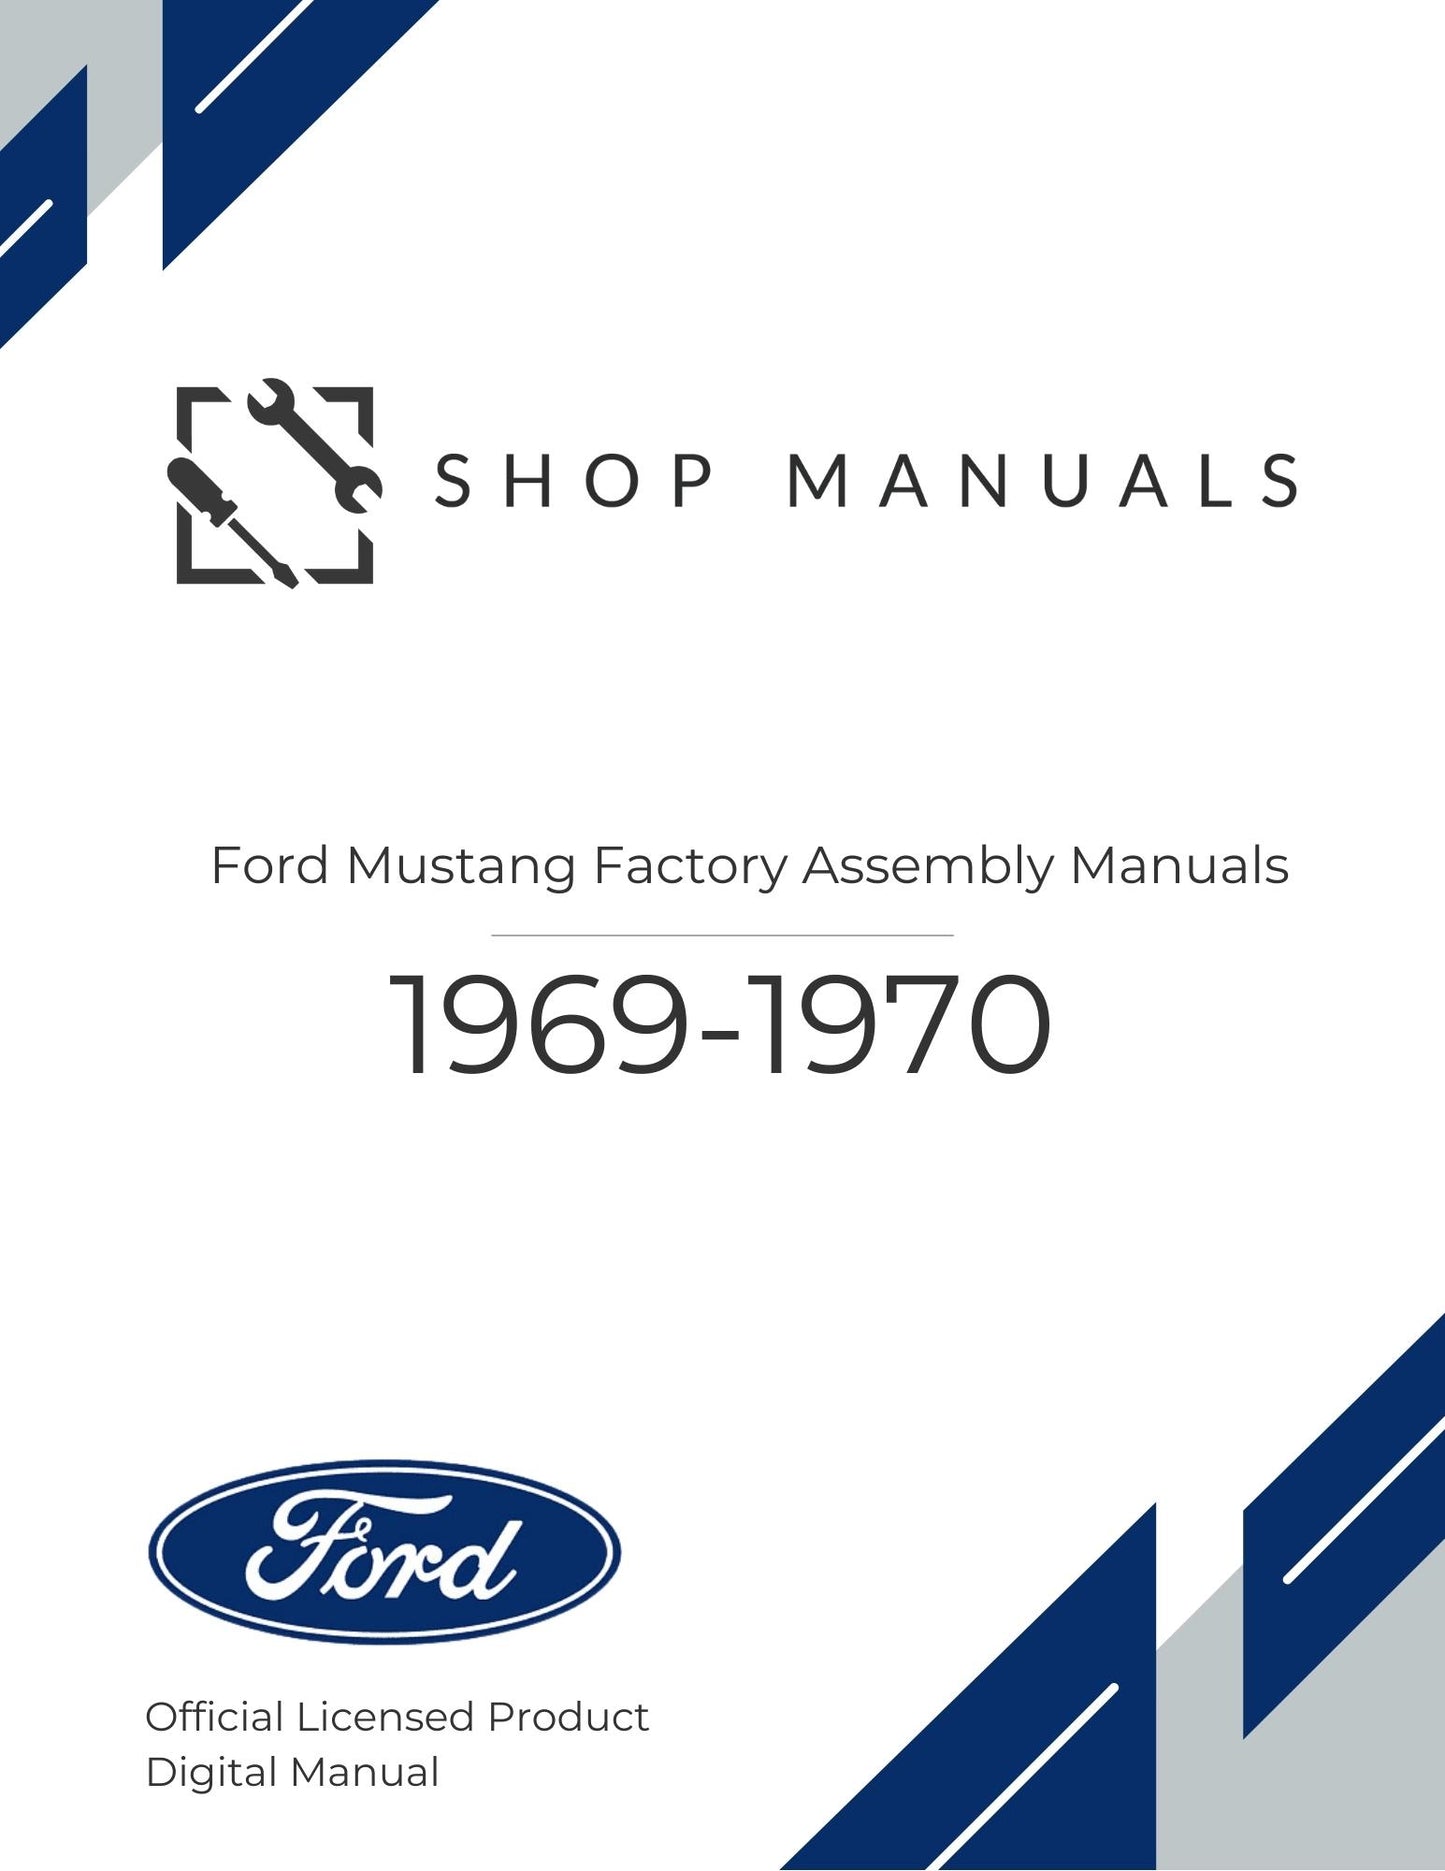 1969-1970 Ford Mustang Factory Assembly Manuals